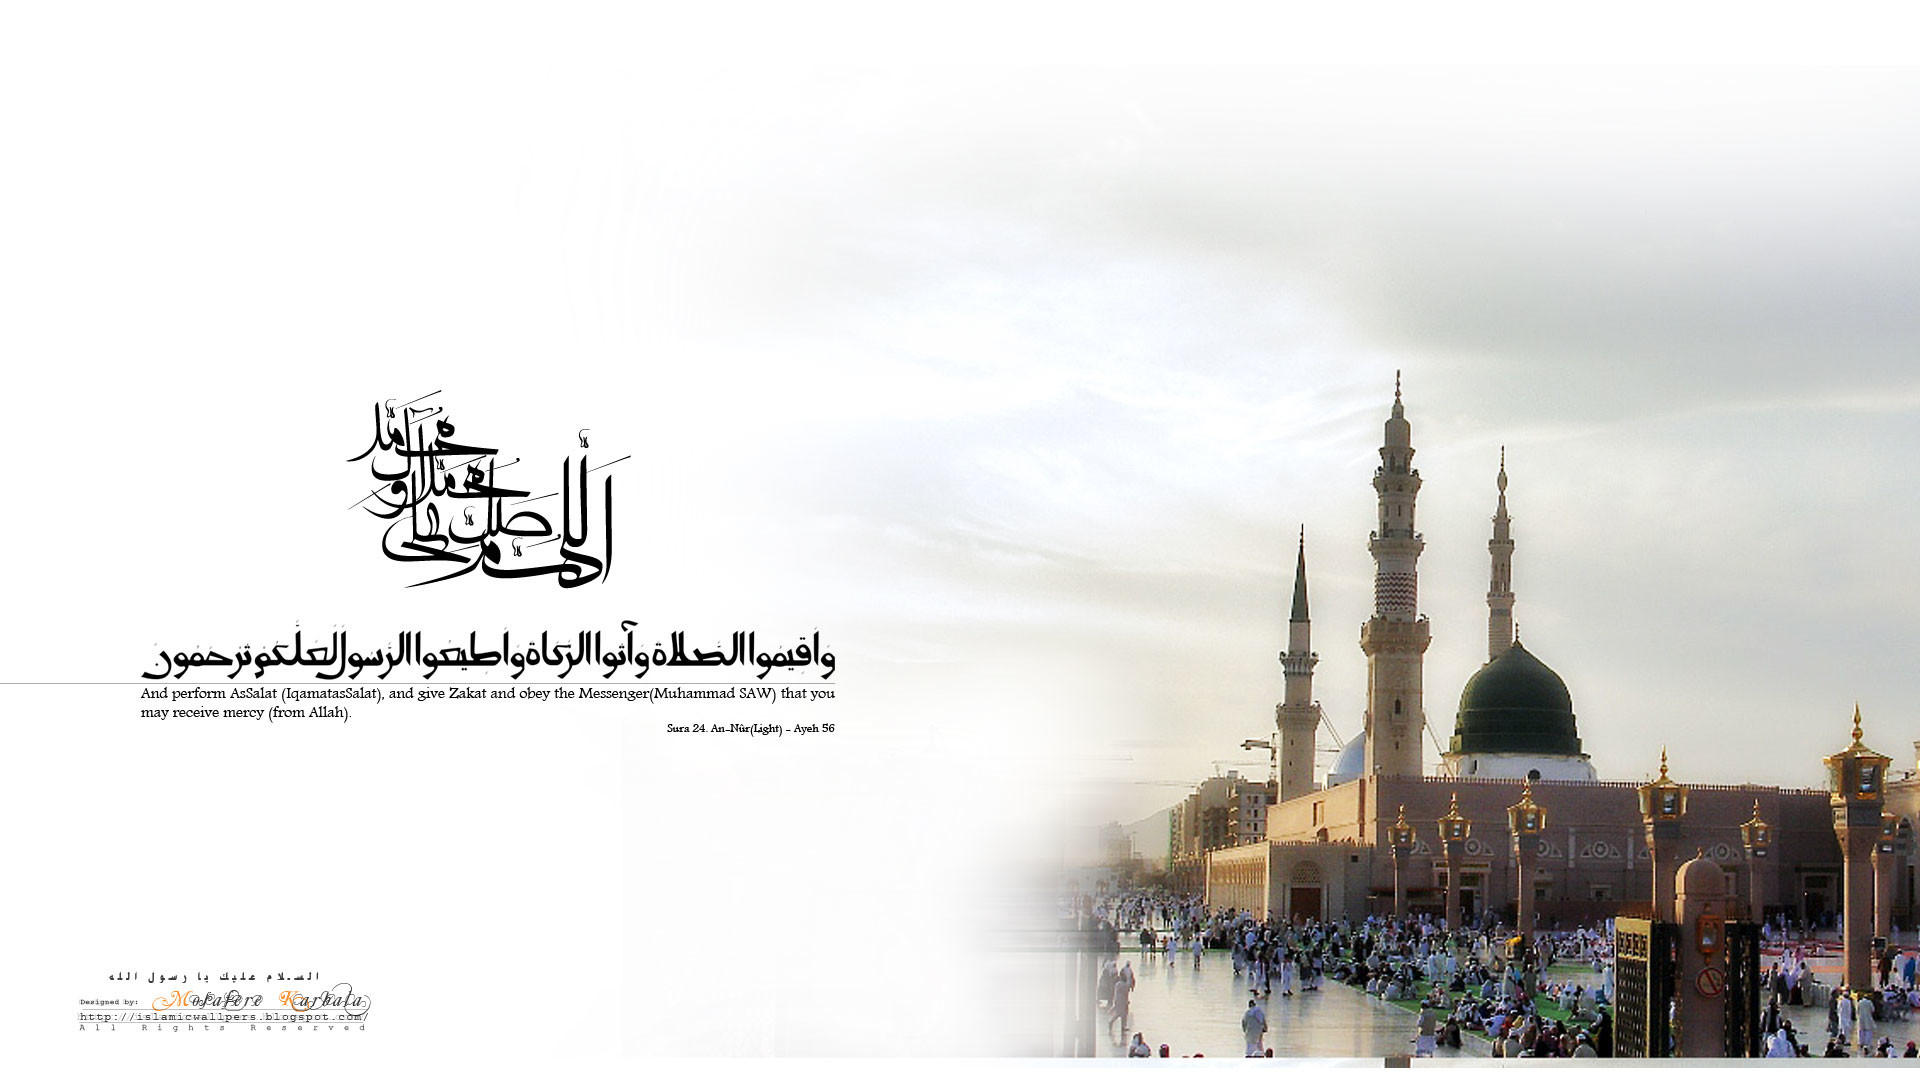 Full HD Islamic Wallpapers 1920x1080 (77+ images)